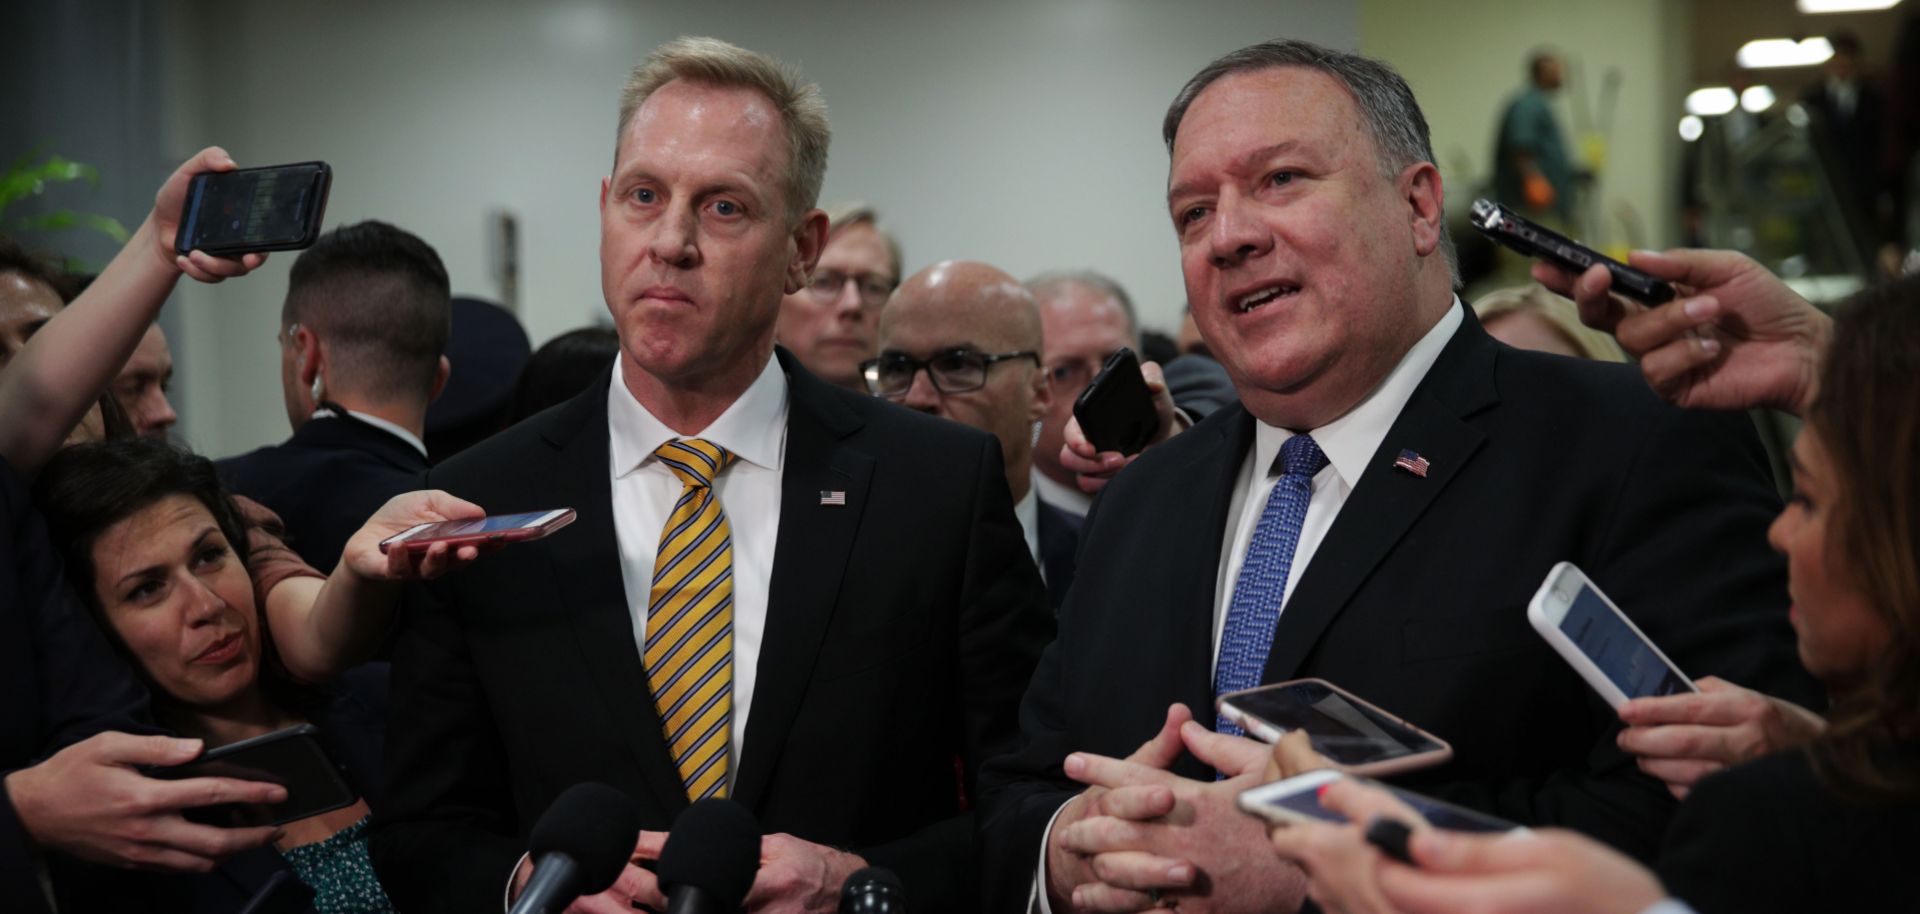 U.S. Secretary of State Mike Pompeo, right, and Acting Defense Secretary Patrick Shanahan talk with reporters after briefing members of Congress about Iran on May 21, 2019.